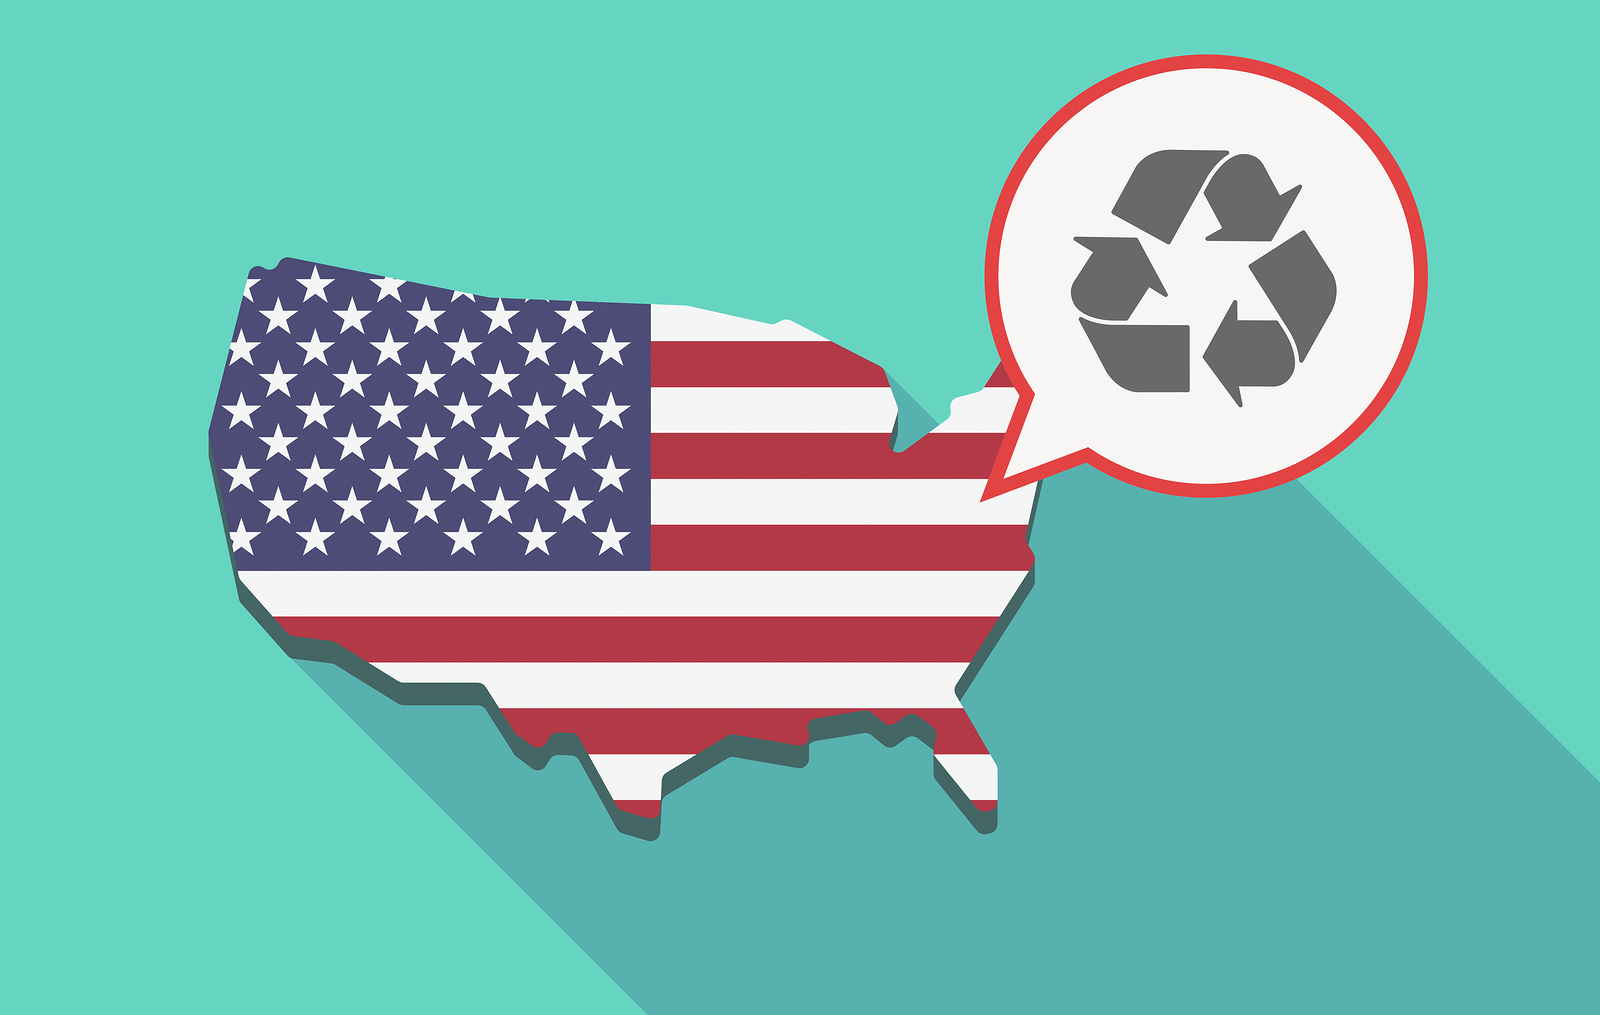 Check out this list of the top recycling states in the US. Wondering which American state is the greenest? We've got the answer for you!